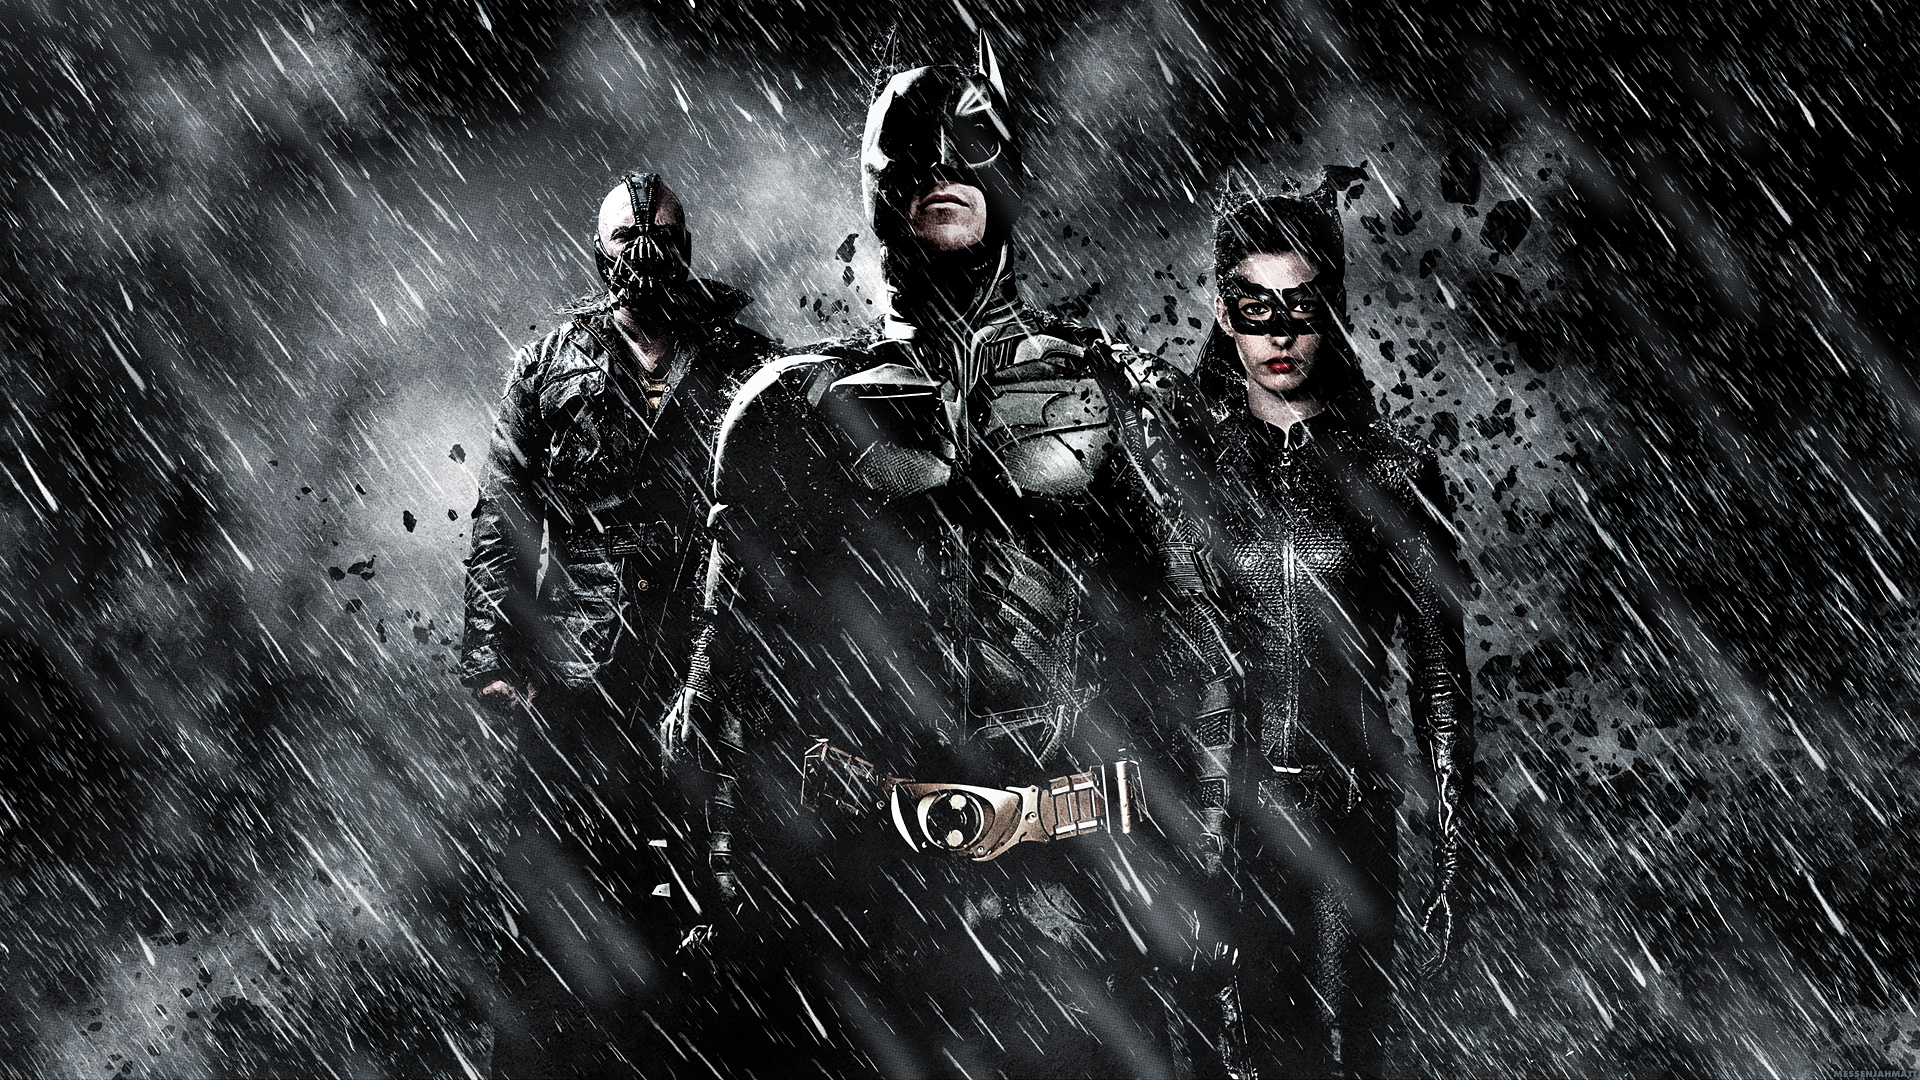 The Dark Knight Rises Movie Wallpapers HD Wallpapers 1920x1080